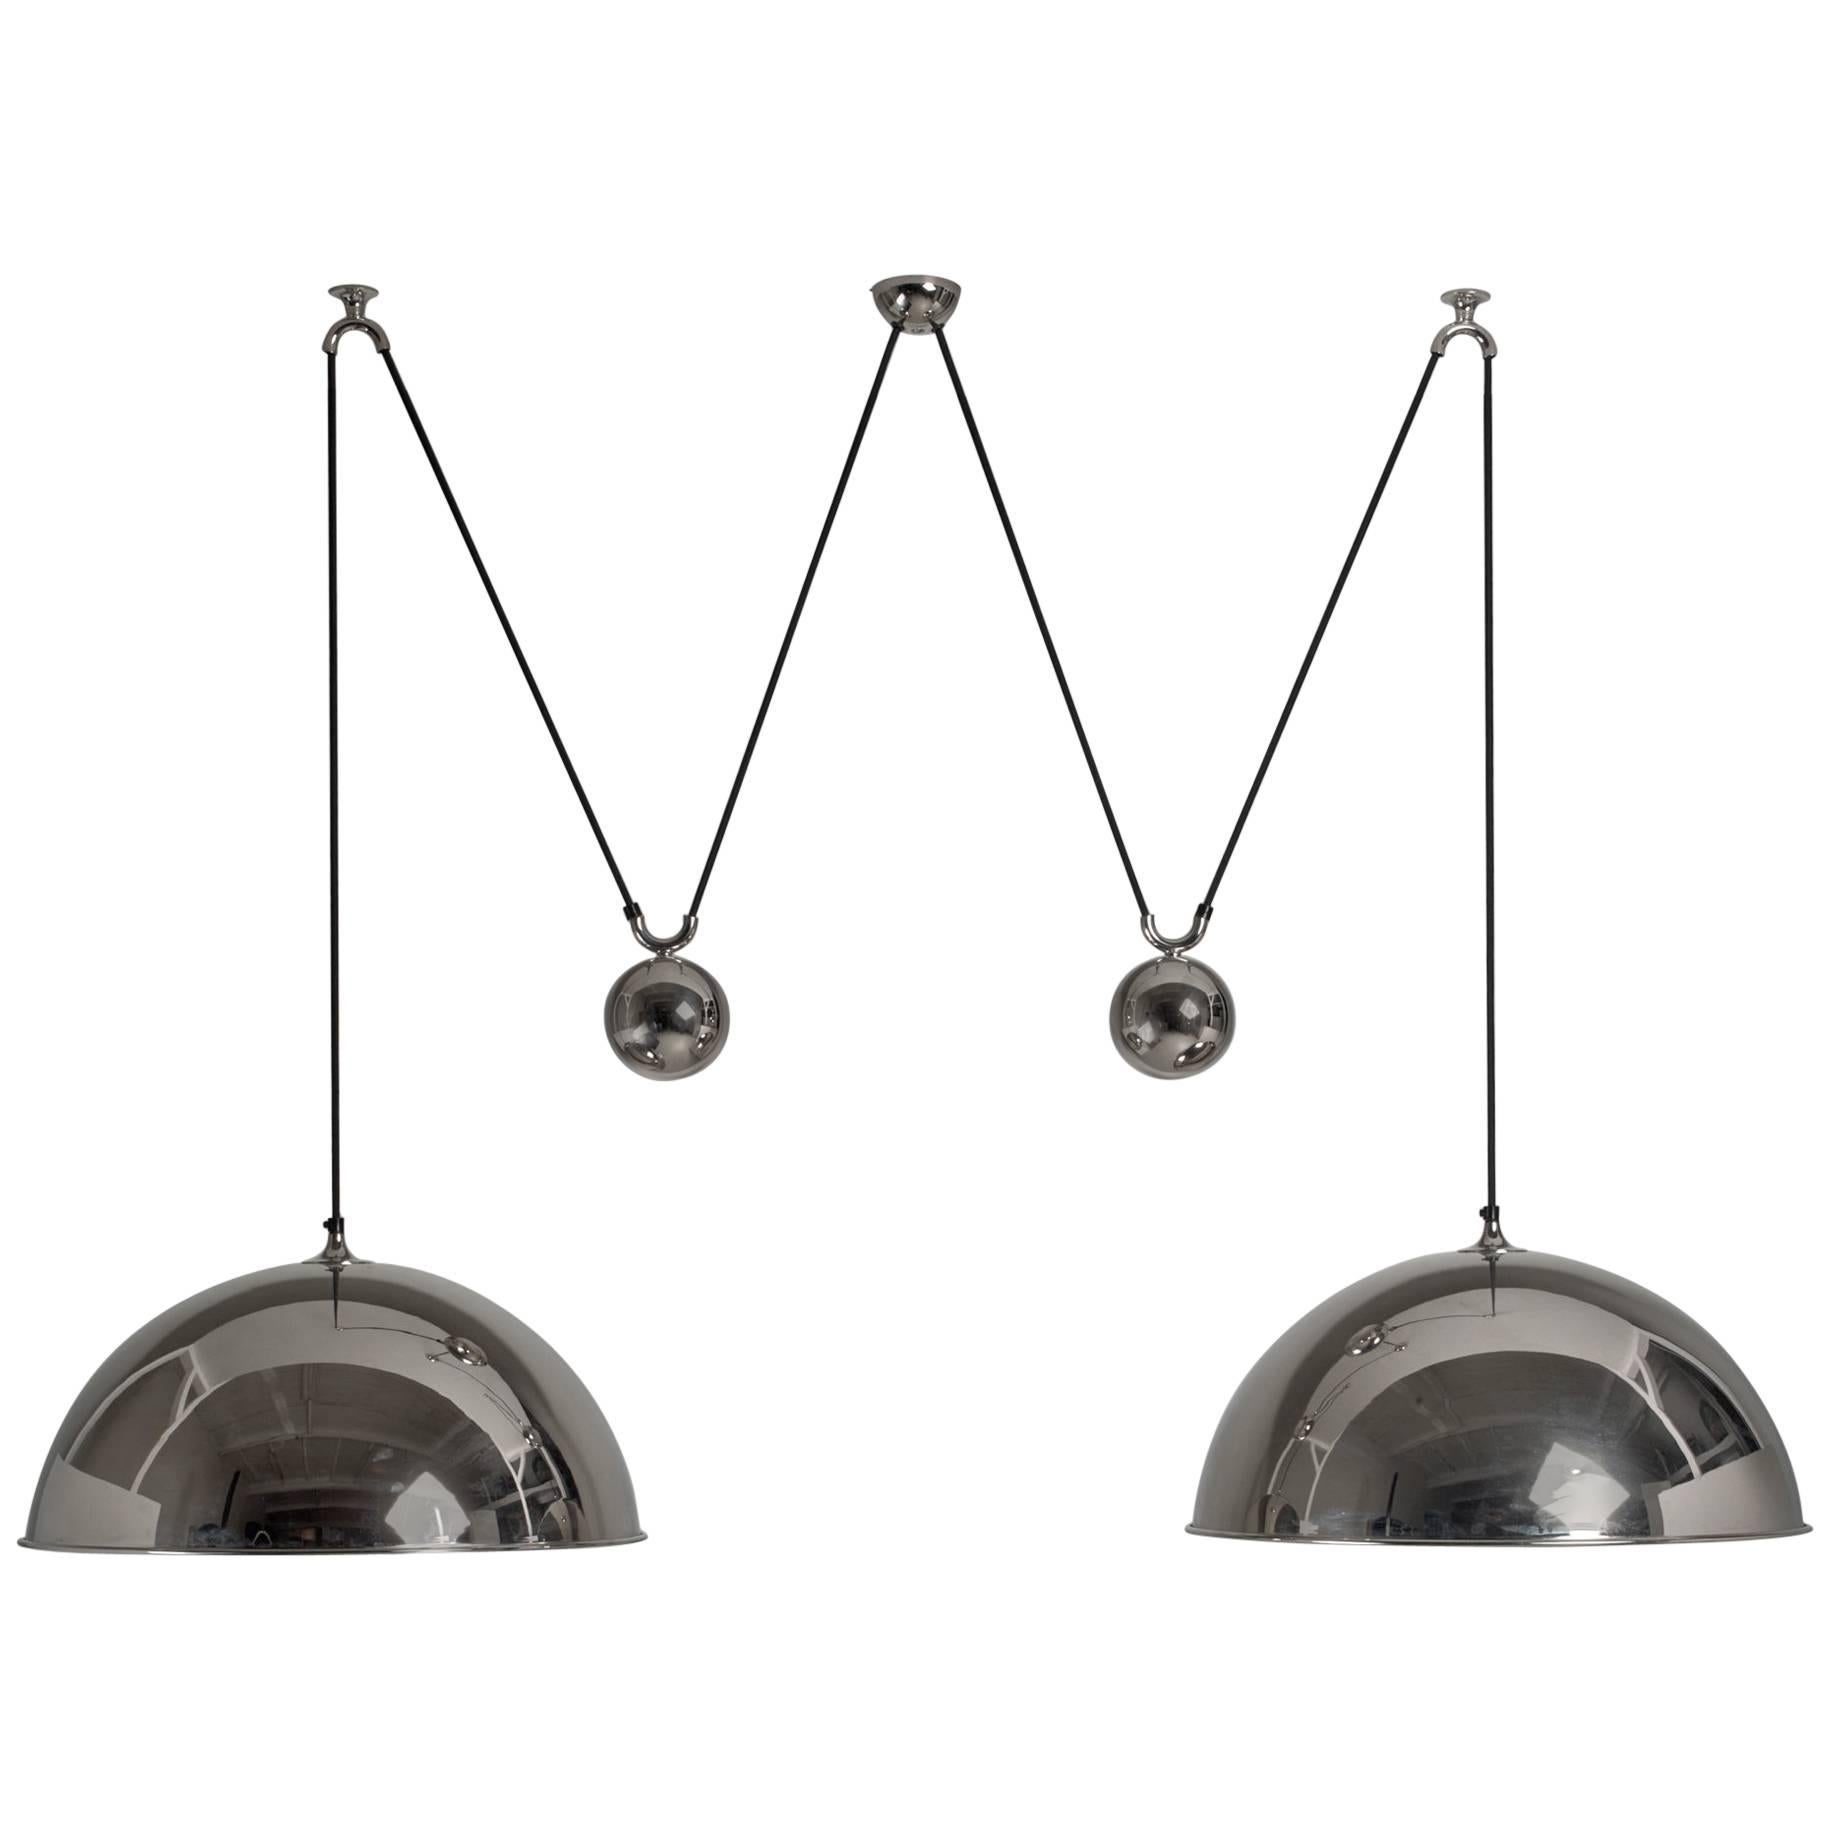 Florian Schulz Double Nickel Posa Pendants with Counterweights, Germany